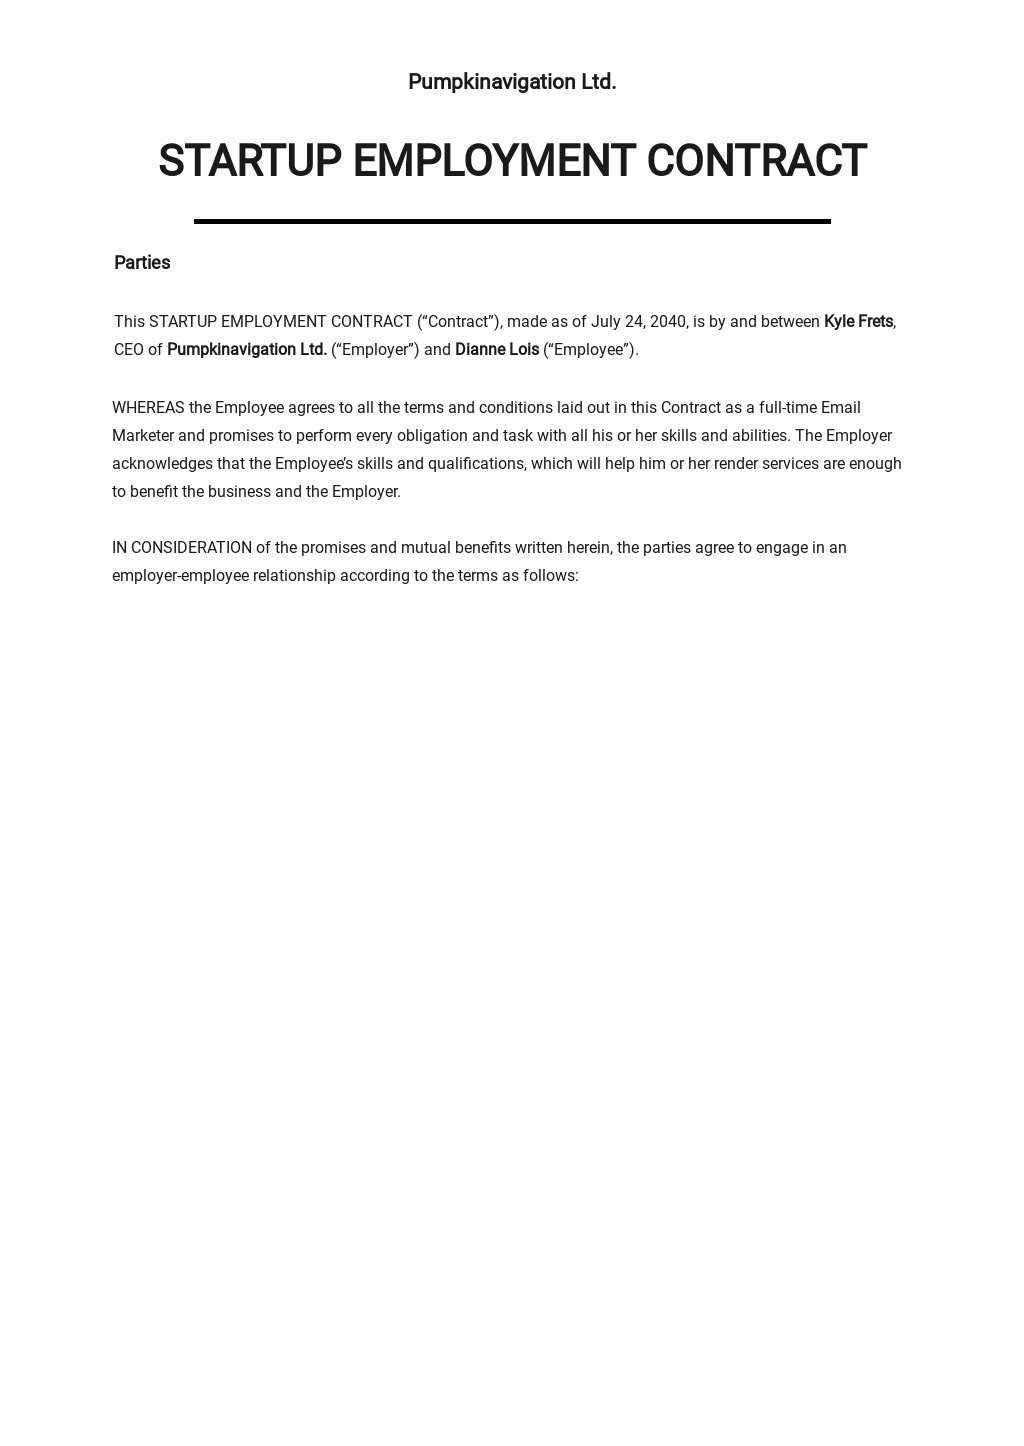 18+ FREE Employment Contract Templates [Edit & Download]